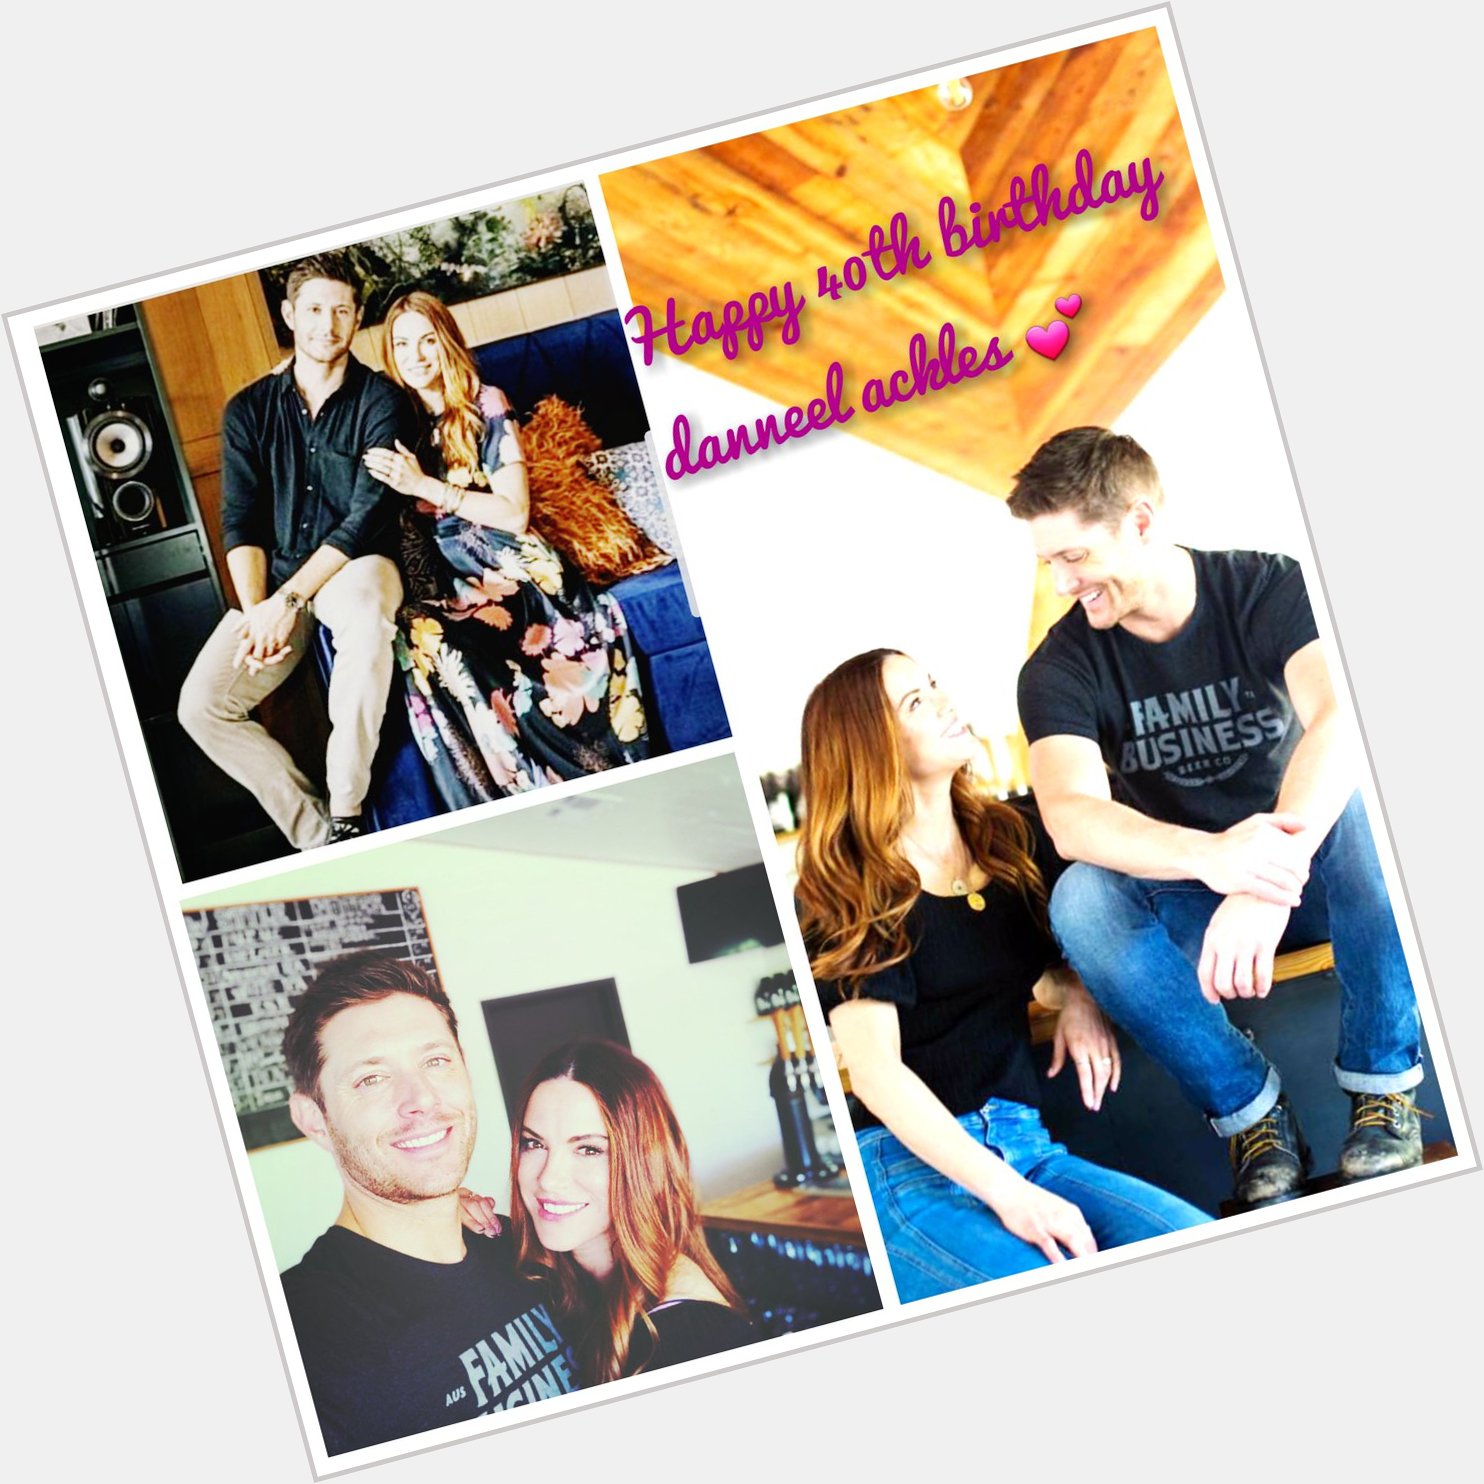 Happy 40th birthday danneel ackles I hope you enjoying today love you so much     